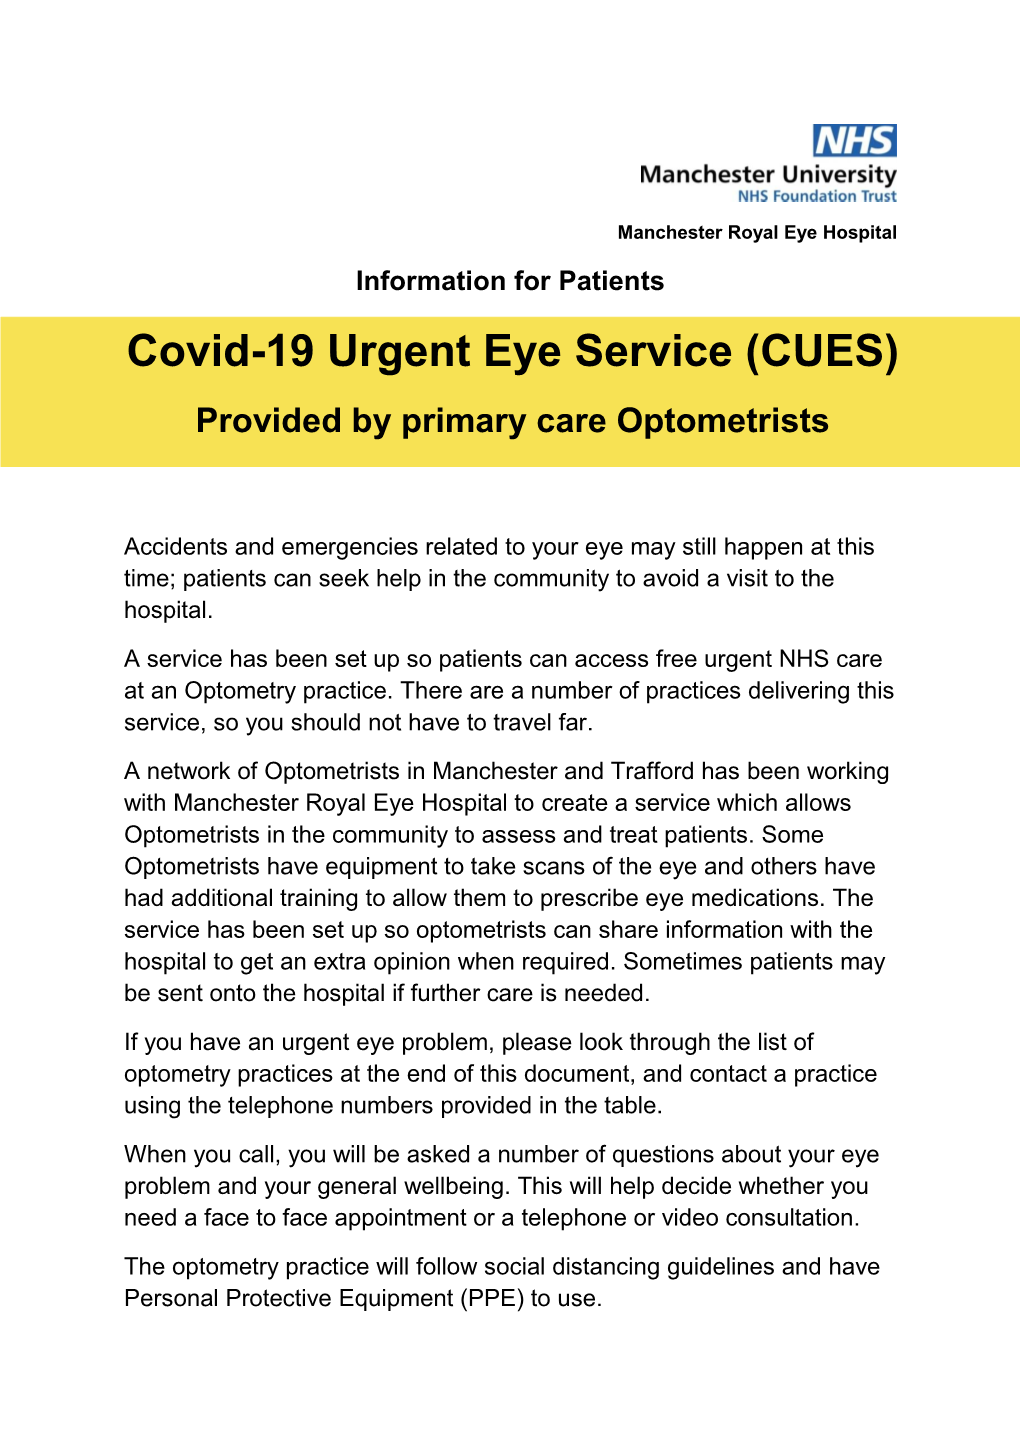 Covid-19 Urgent Eye Service (CUES) Provided by Primary Care Optometrists